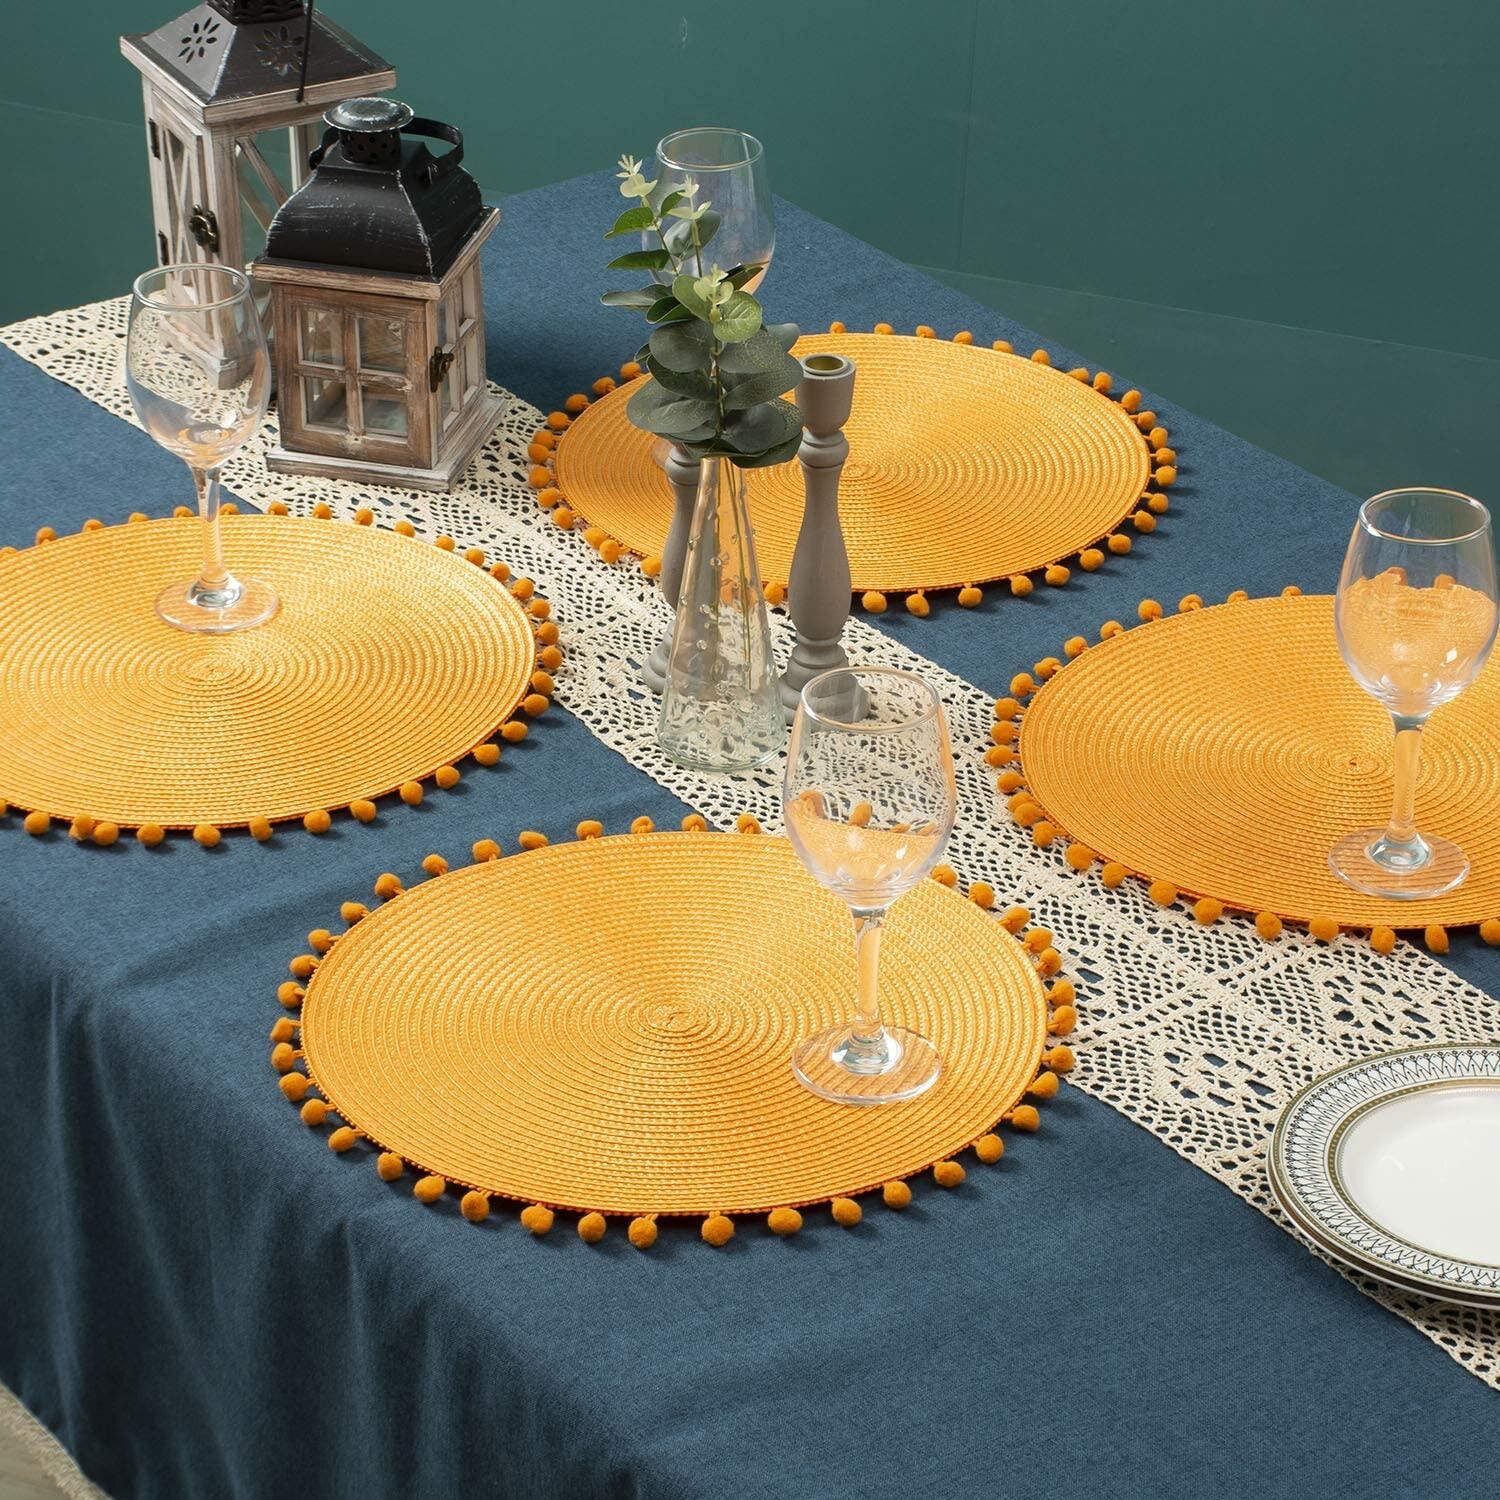 4 Pack of Round Jacquard Weaved Non Slip Placemats Dining Table Place Mats Set